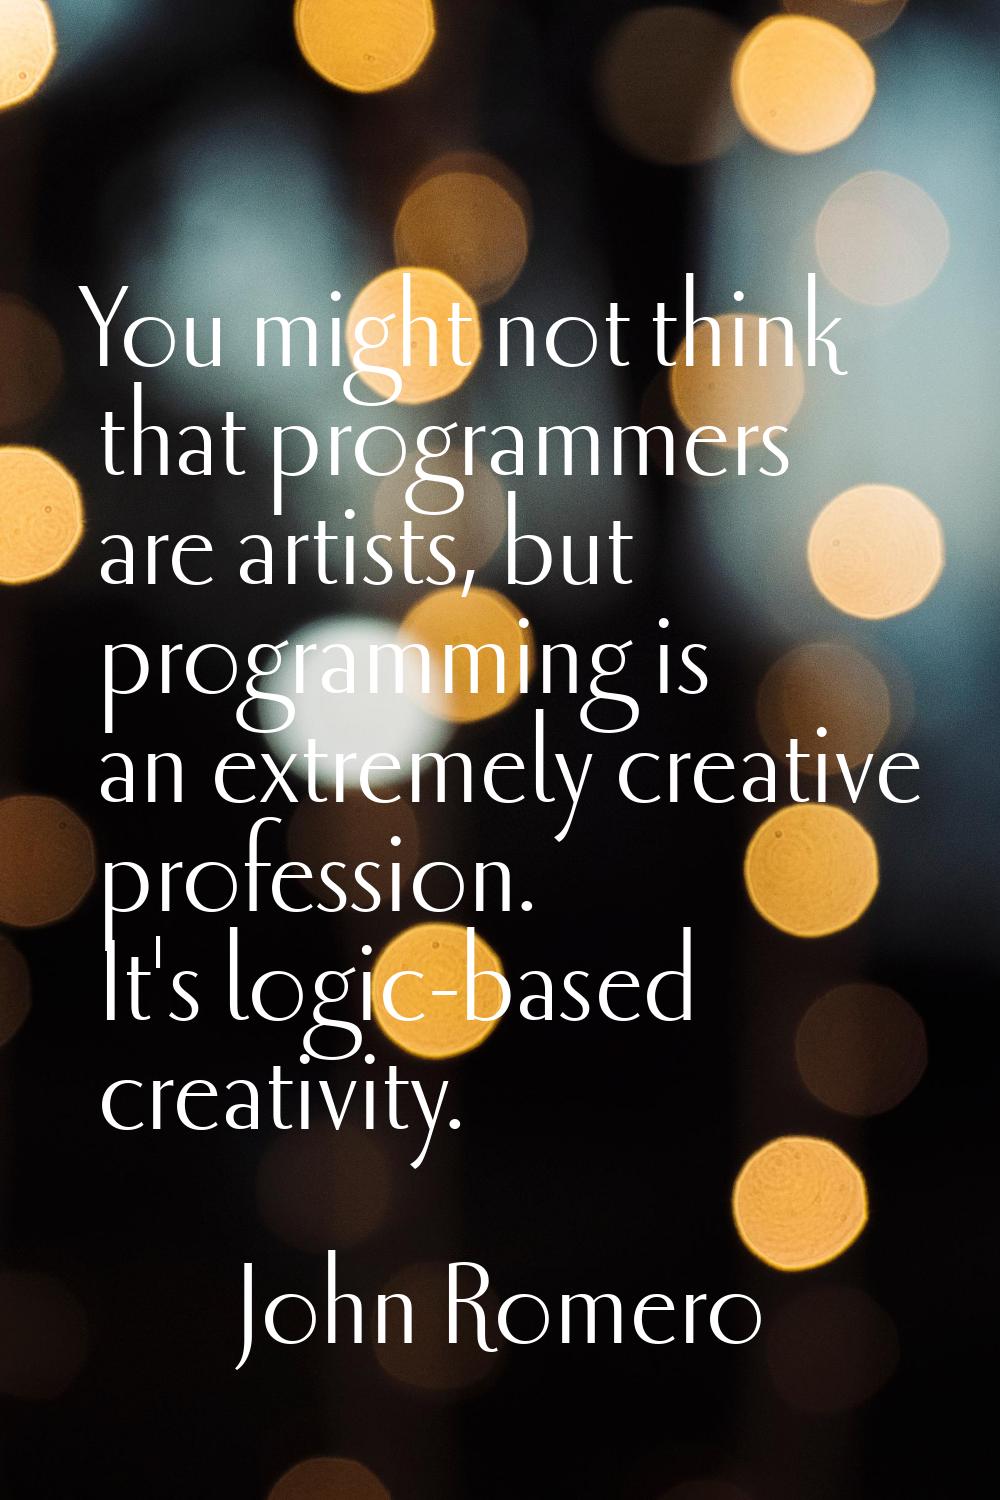 You might not think that programmers are artists, but programming is an extremely creative professi